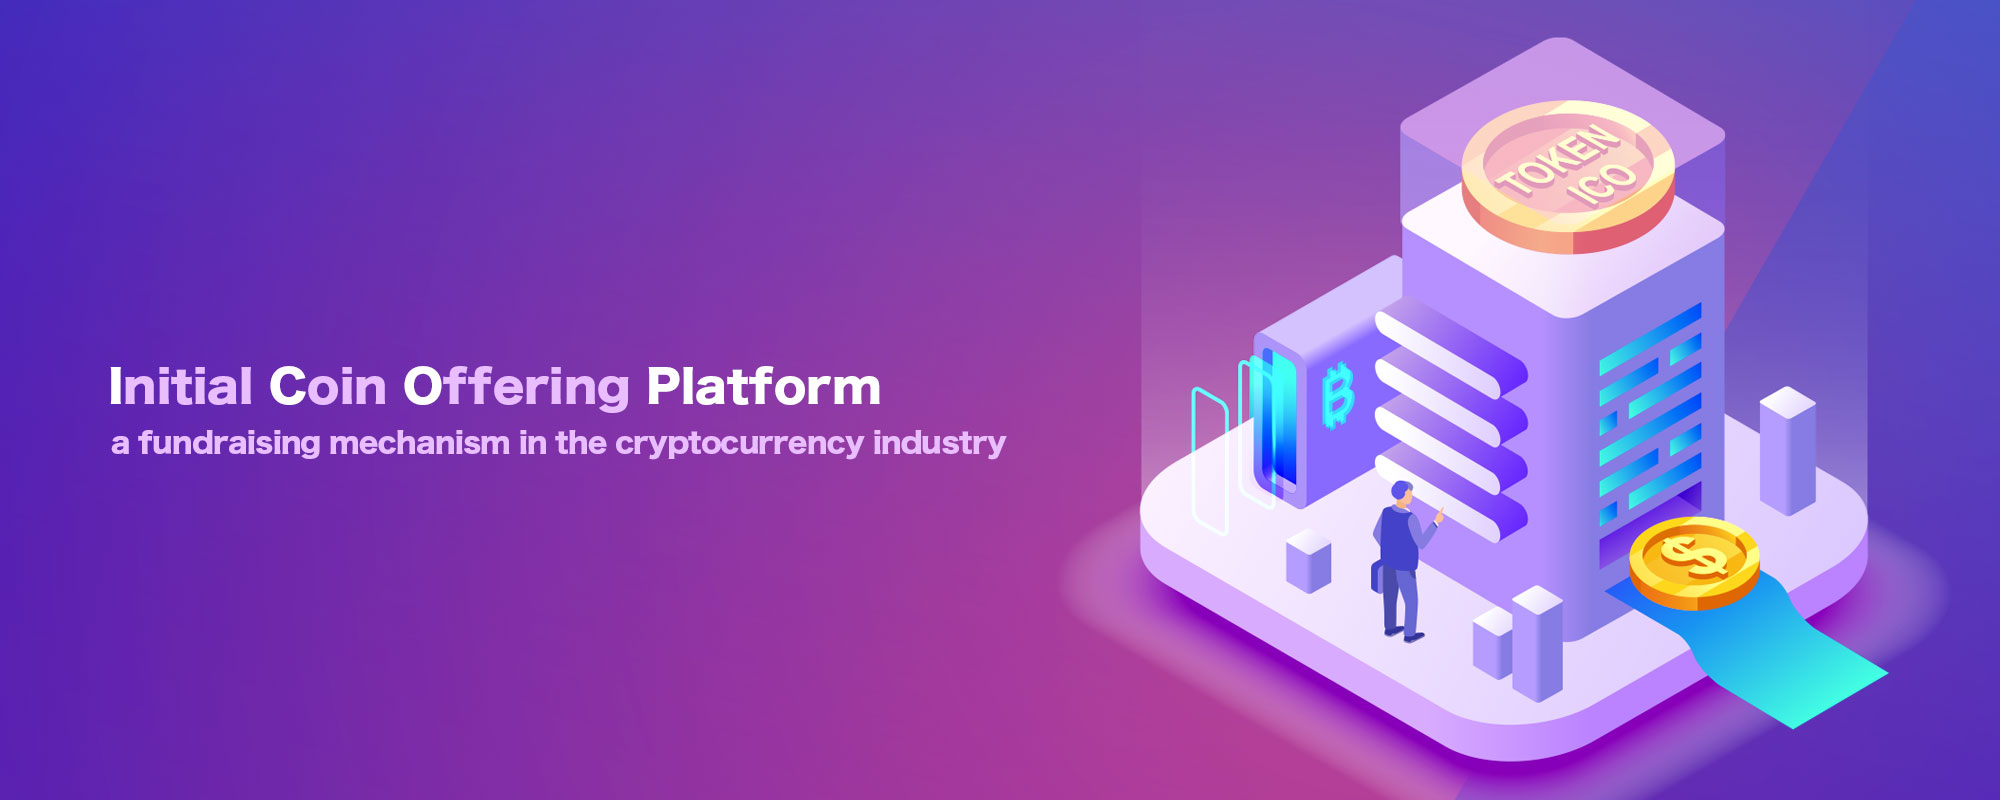 ICO (Initial Coin Offering)Platform